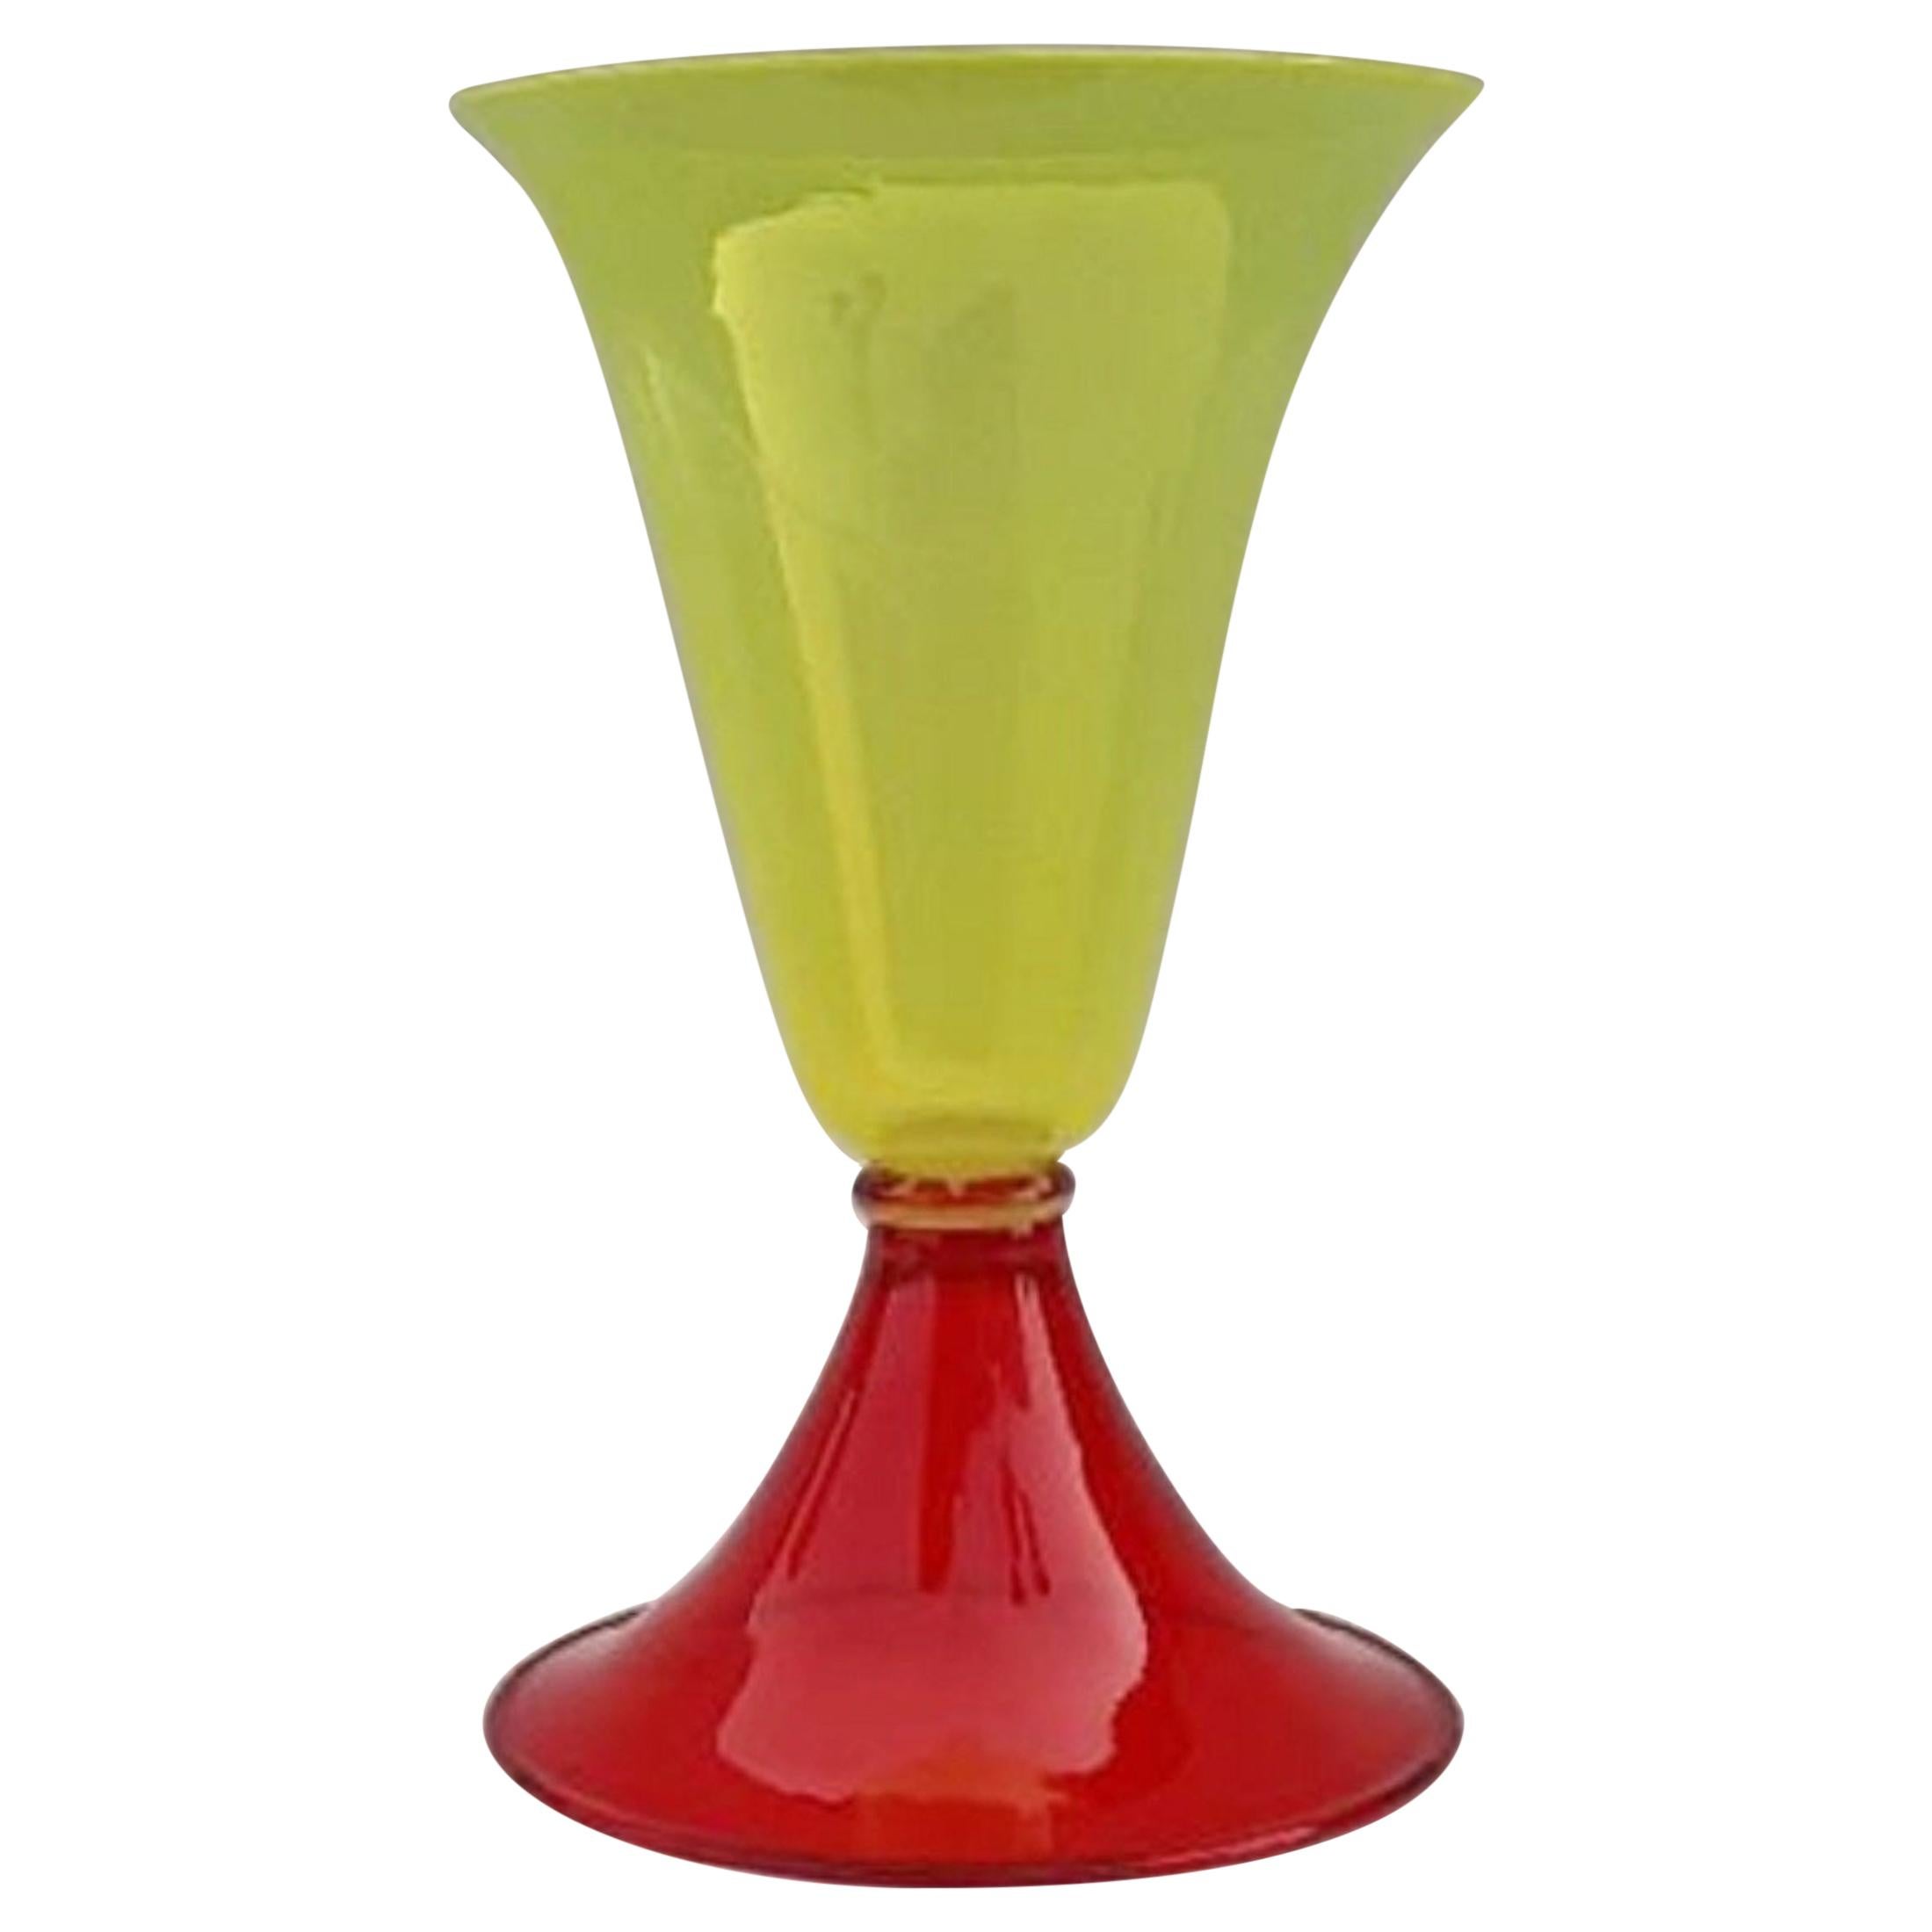 Postmodern " Memphis"  vase produced by Formia, 1985